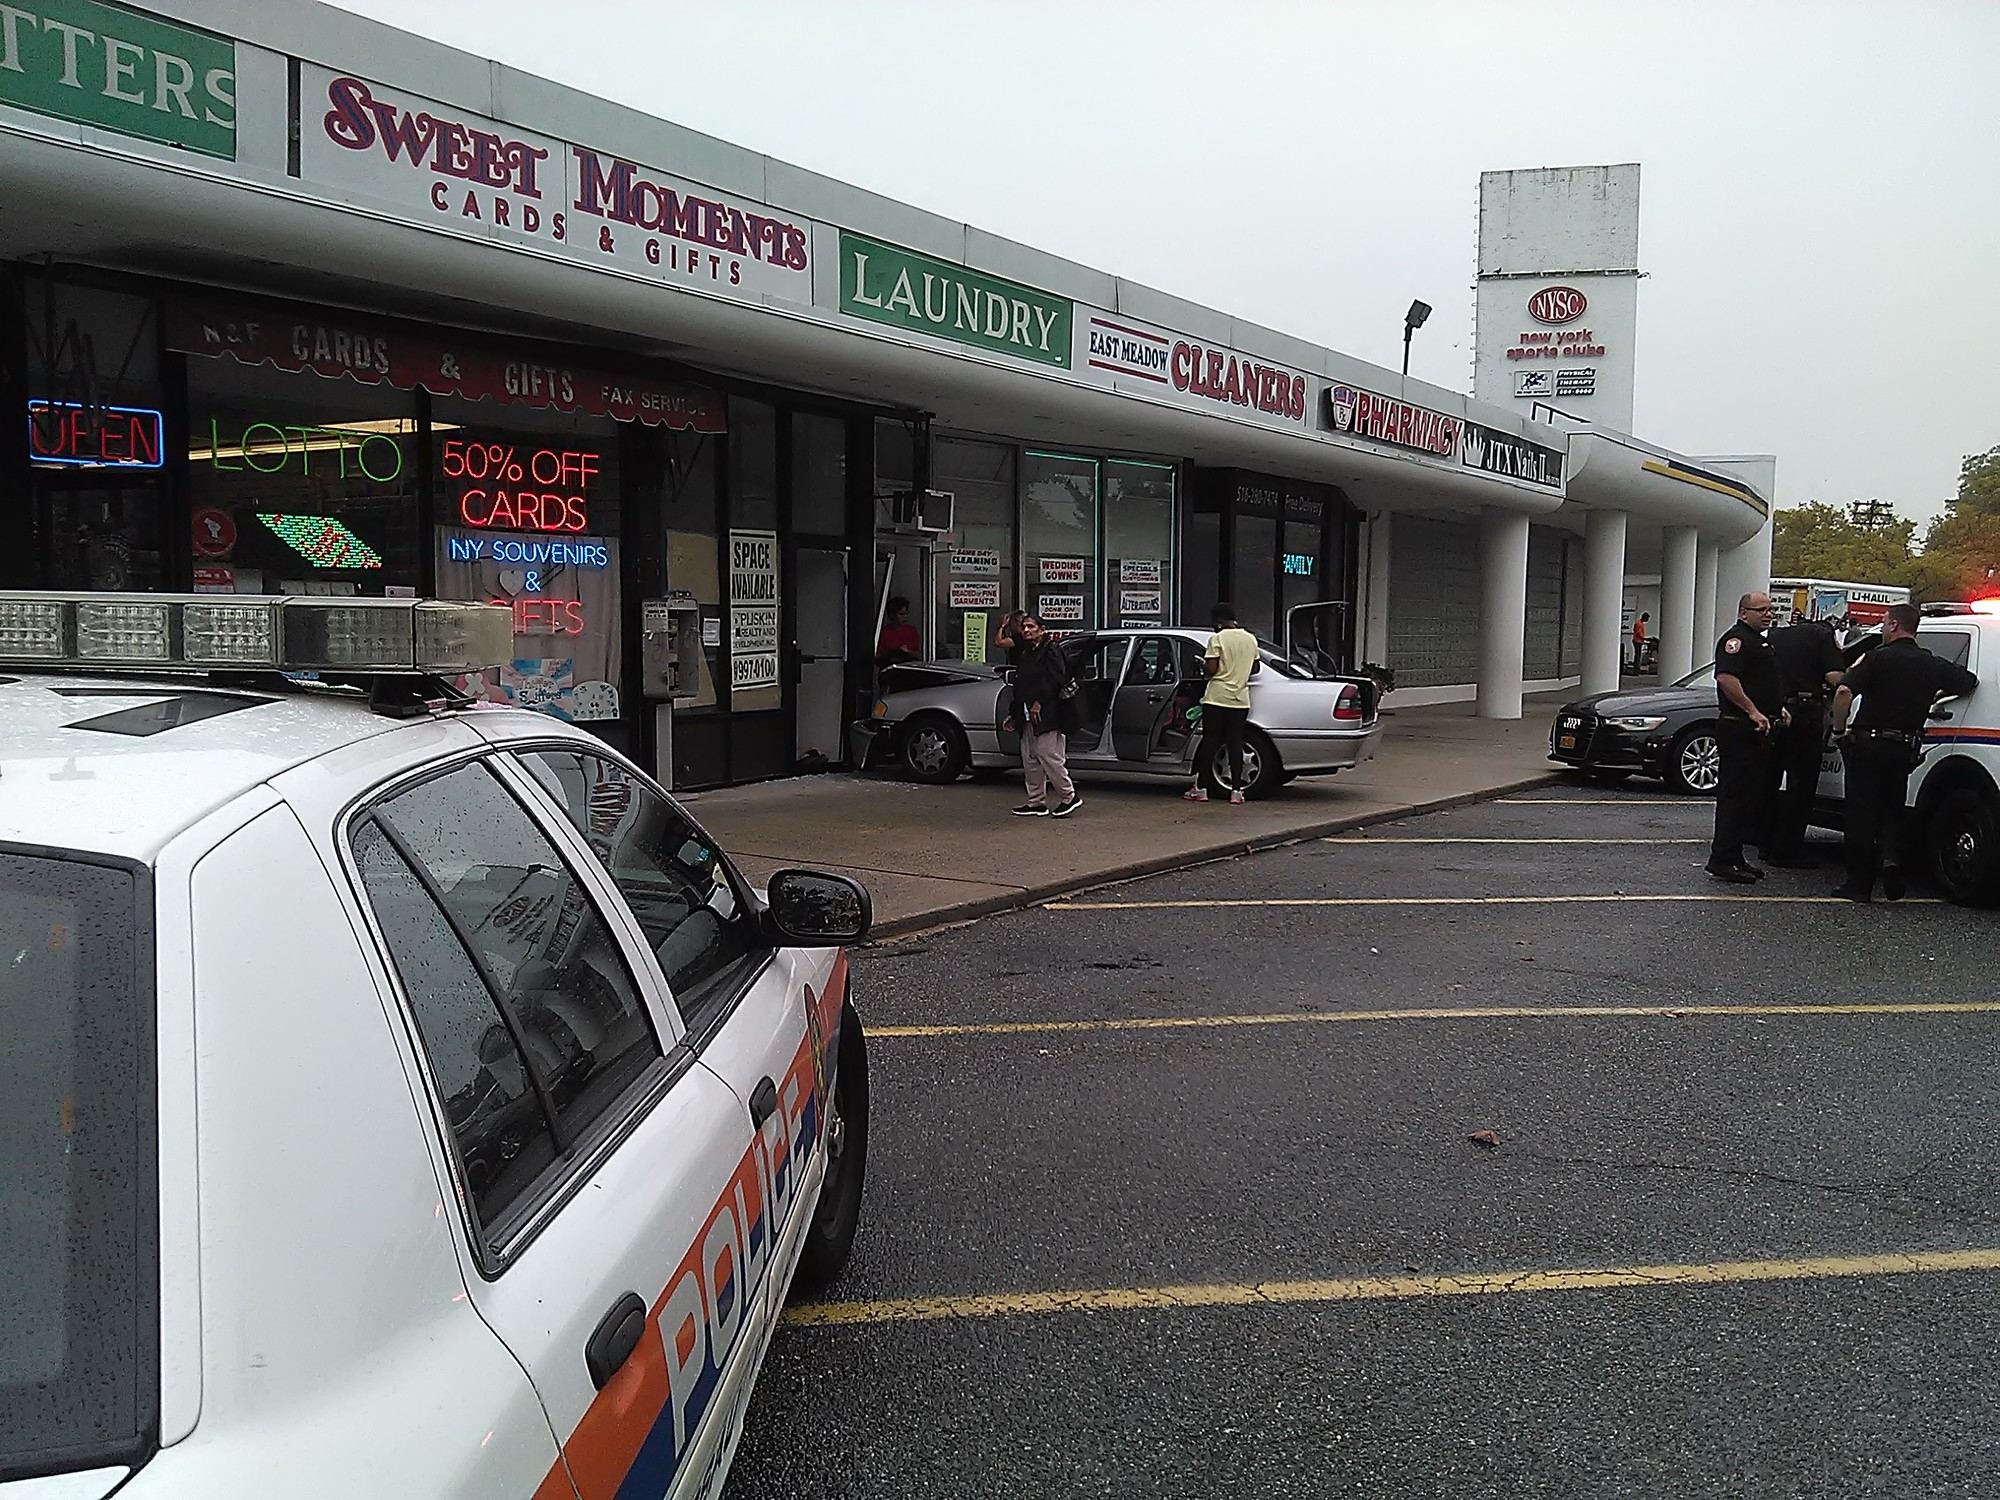 The car struck East meadow Cleaners around 8:30 a.m. Wednesday morning. No one was injured.